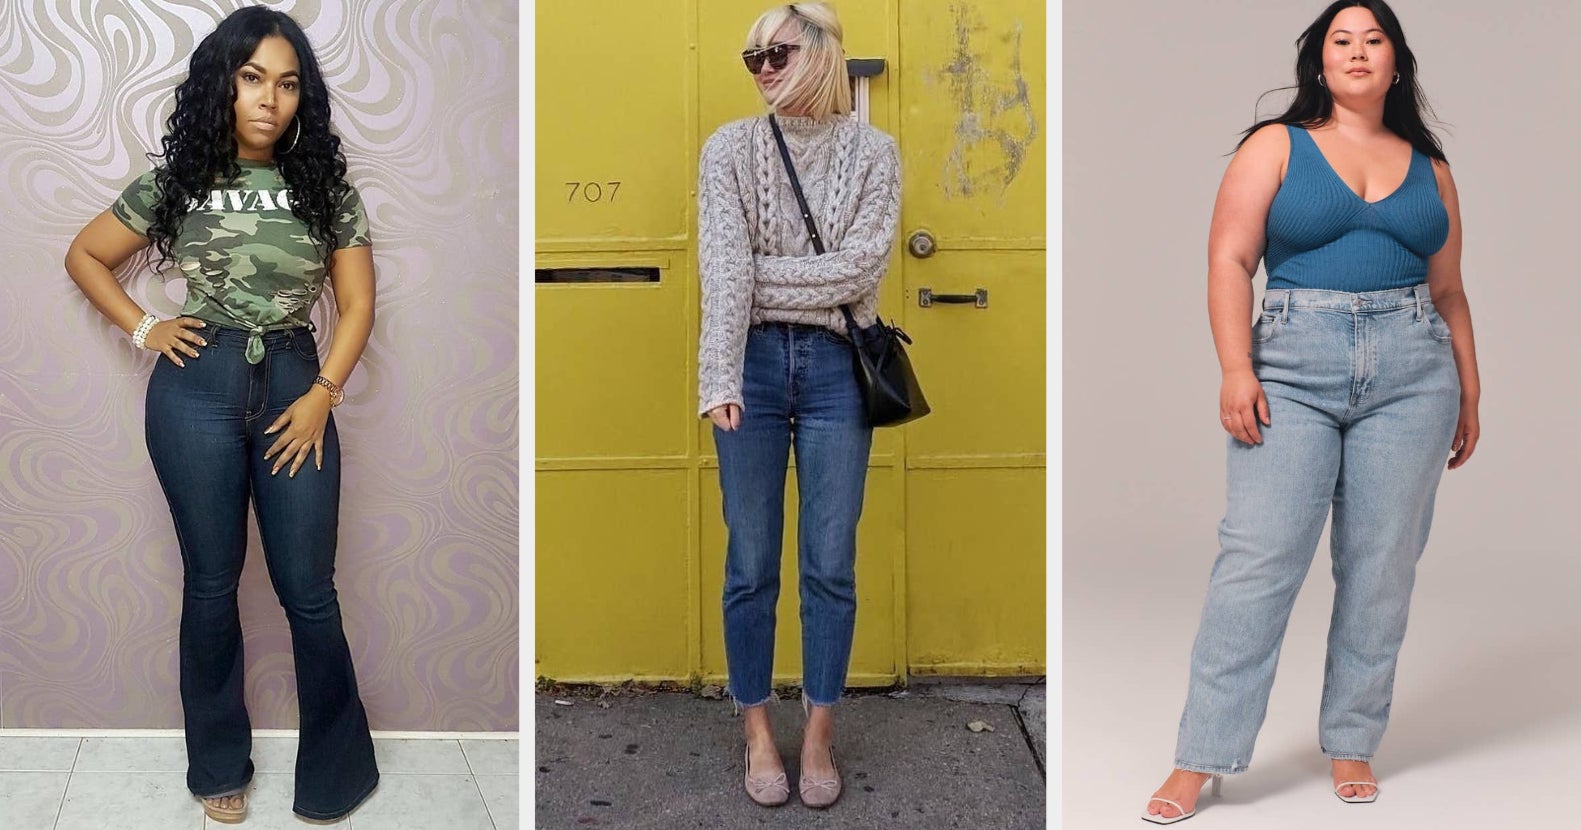 Ditching Skinny Jeans For The Love Of Baggy Jeans?